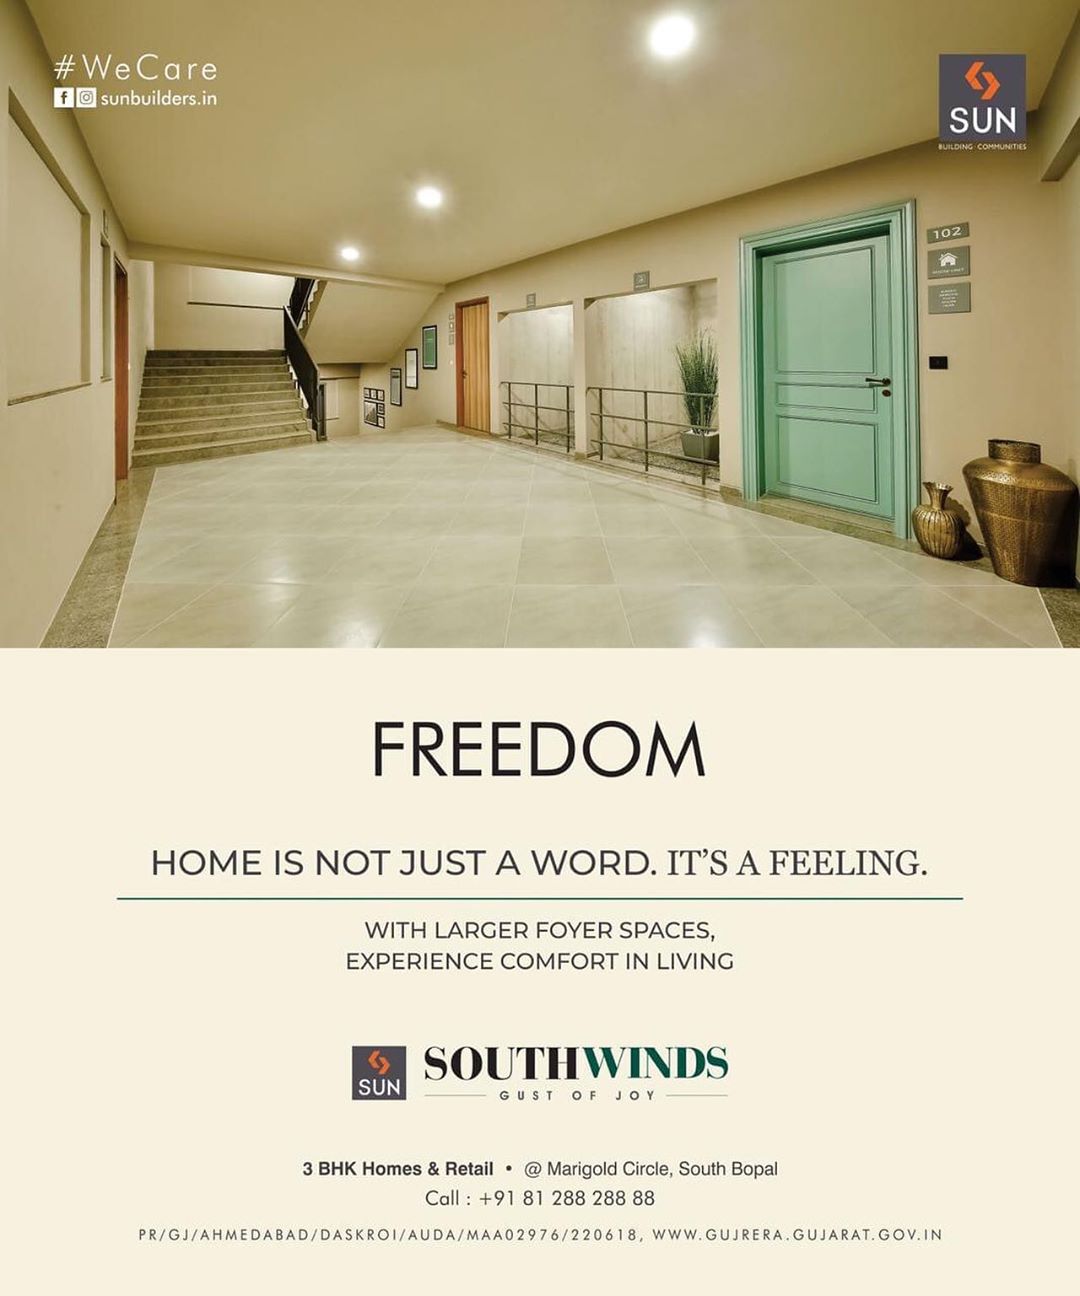 Nearly 4 decades of trust, quality construction, ethical practice and commitment is what you get with Us. 
Sun South Winds, Retail outlets & 3BHK Affordable Homes located at prime location in South Bopal. Designed aesthetically and well planned project in close promixity to all your daily necessities. 
Possession in 2 months!!
For Details Call +91 987932060

#retail #residential #southbopal #affordablehomes #3bhk #safeinvestment #qualityconstruction #ethics #realestateahmedabad #sunbuildersgroup #staysafe #wecare